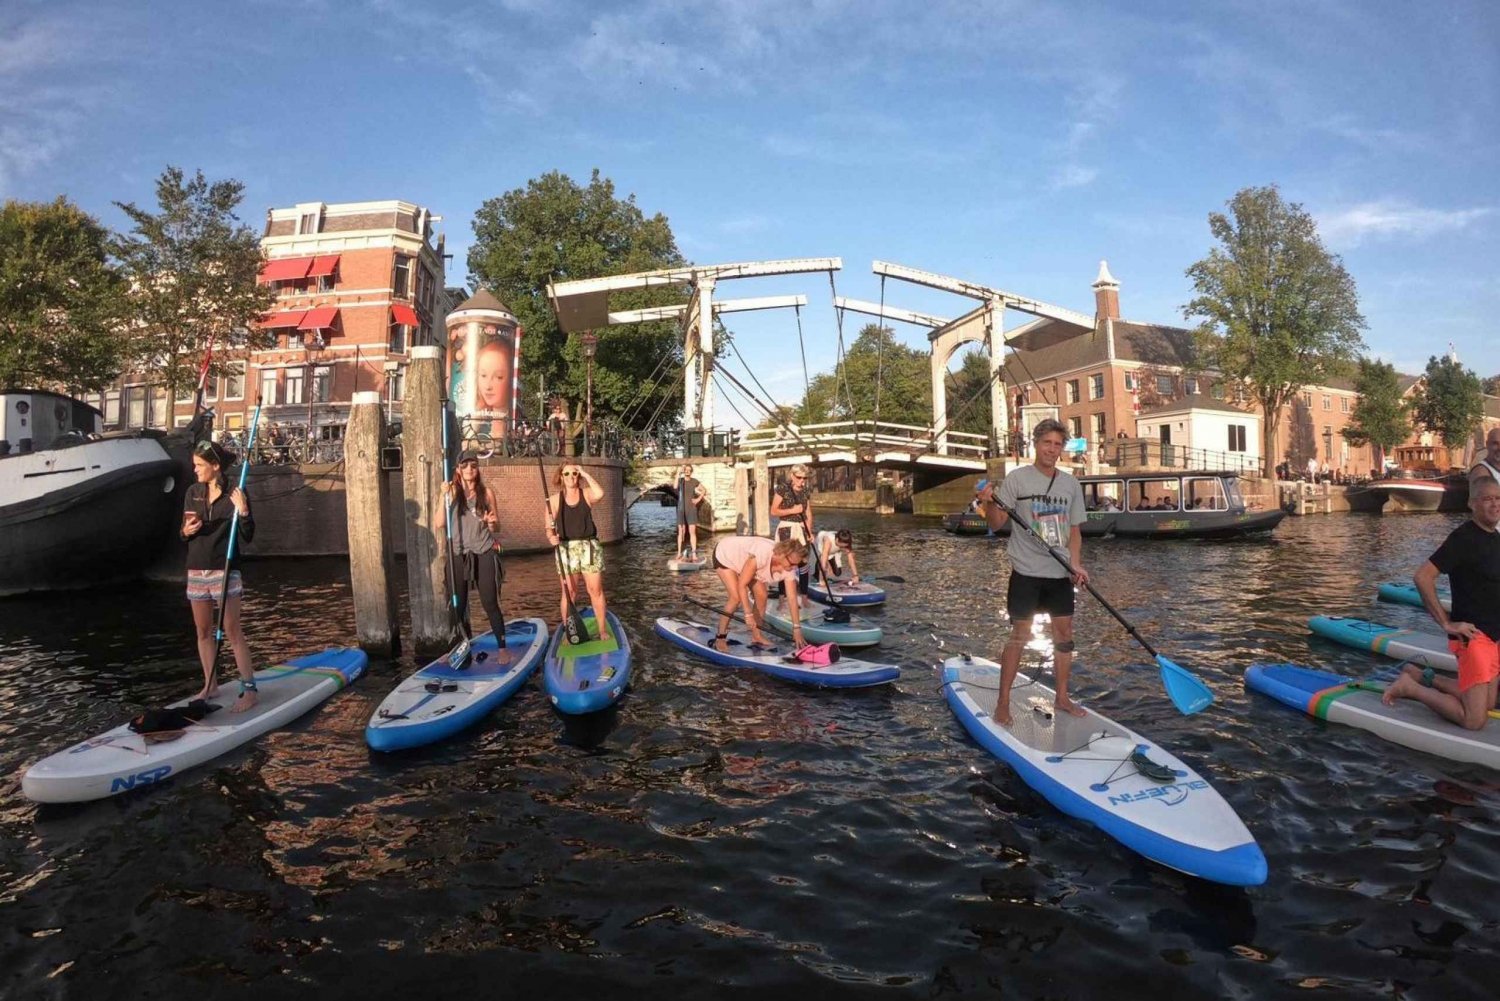 Amsterdam: tour di 2 ore in stand up paddle